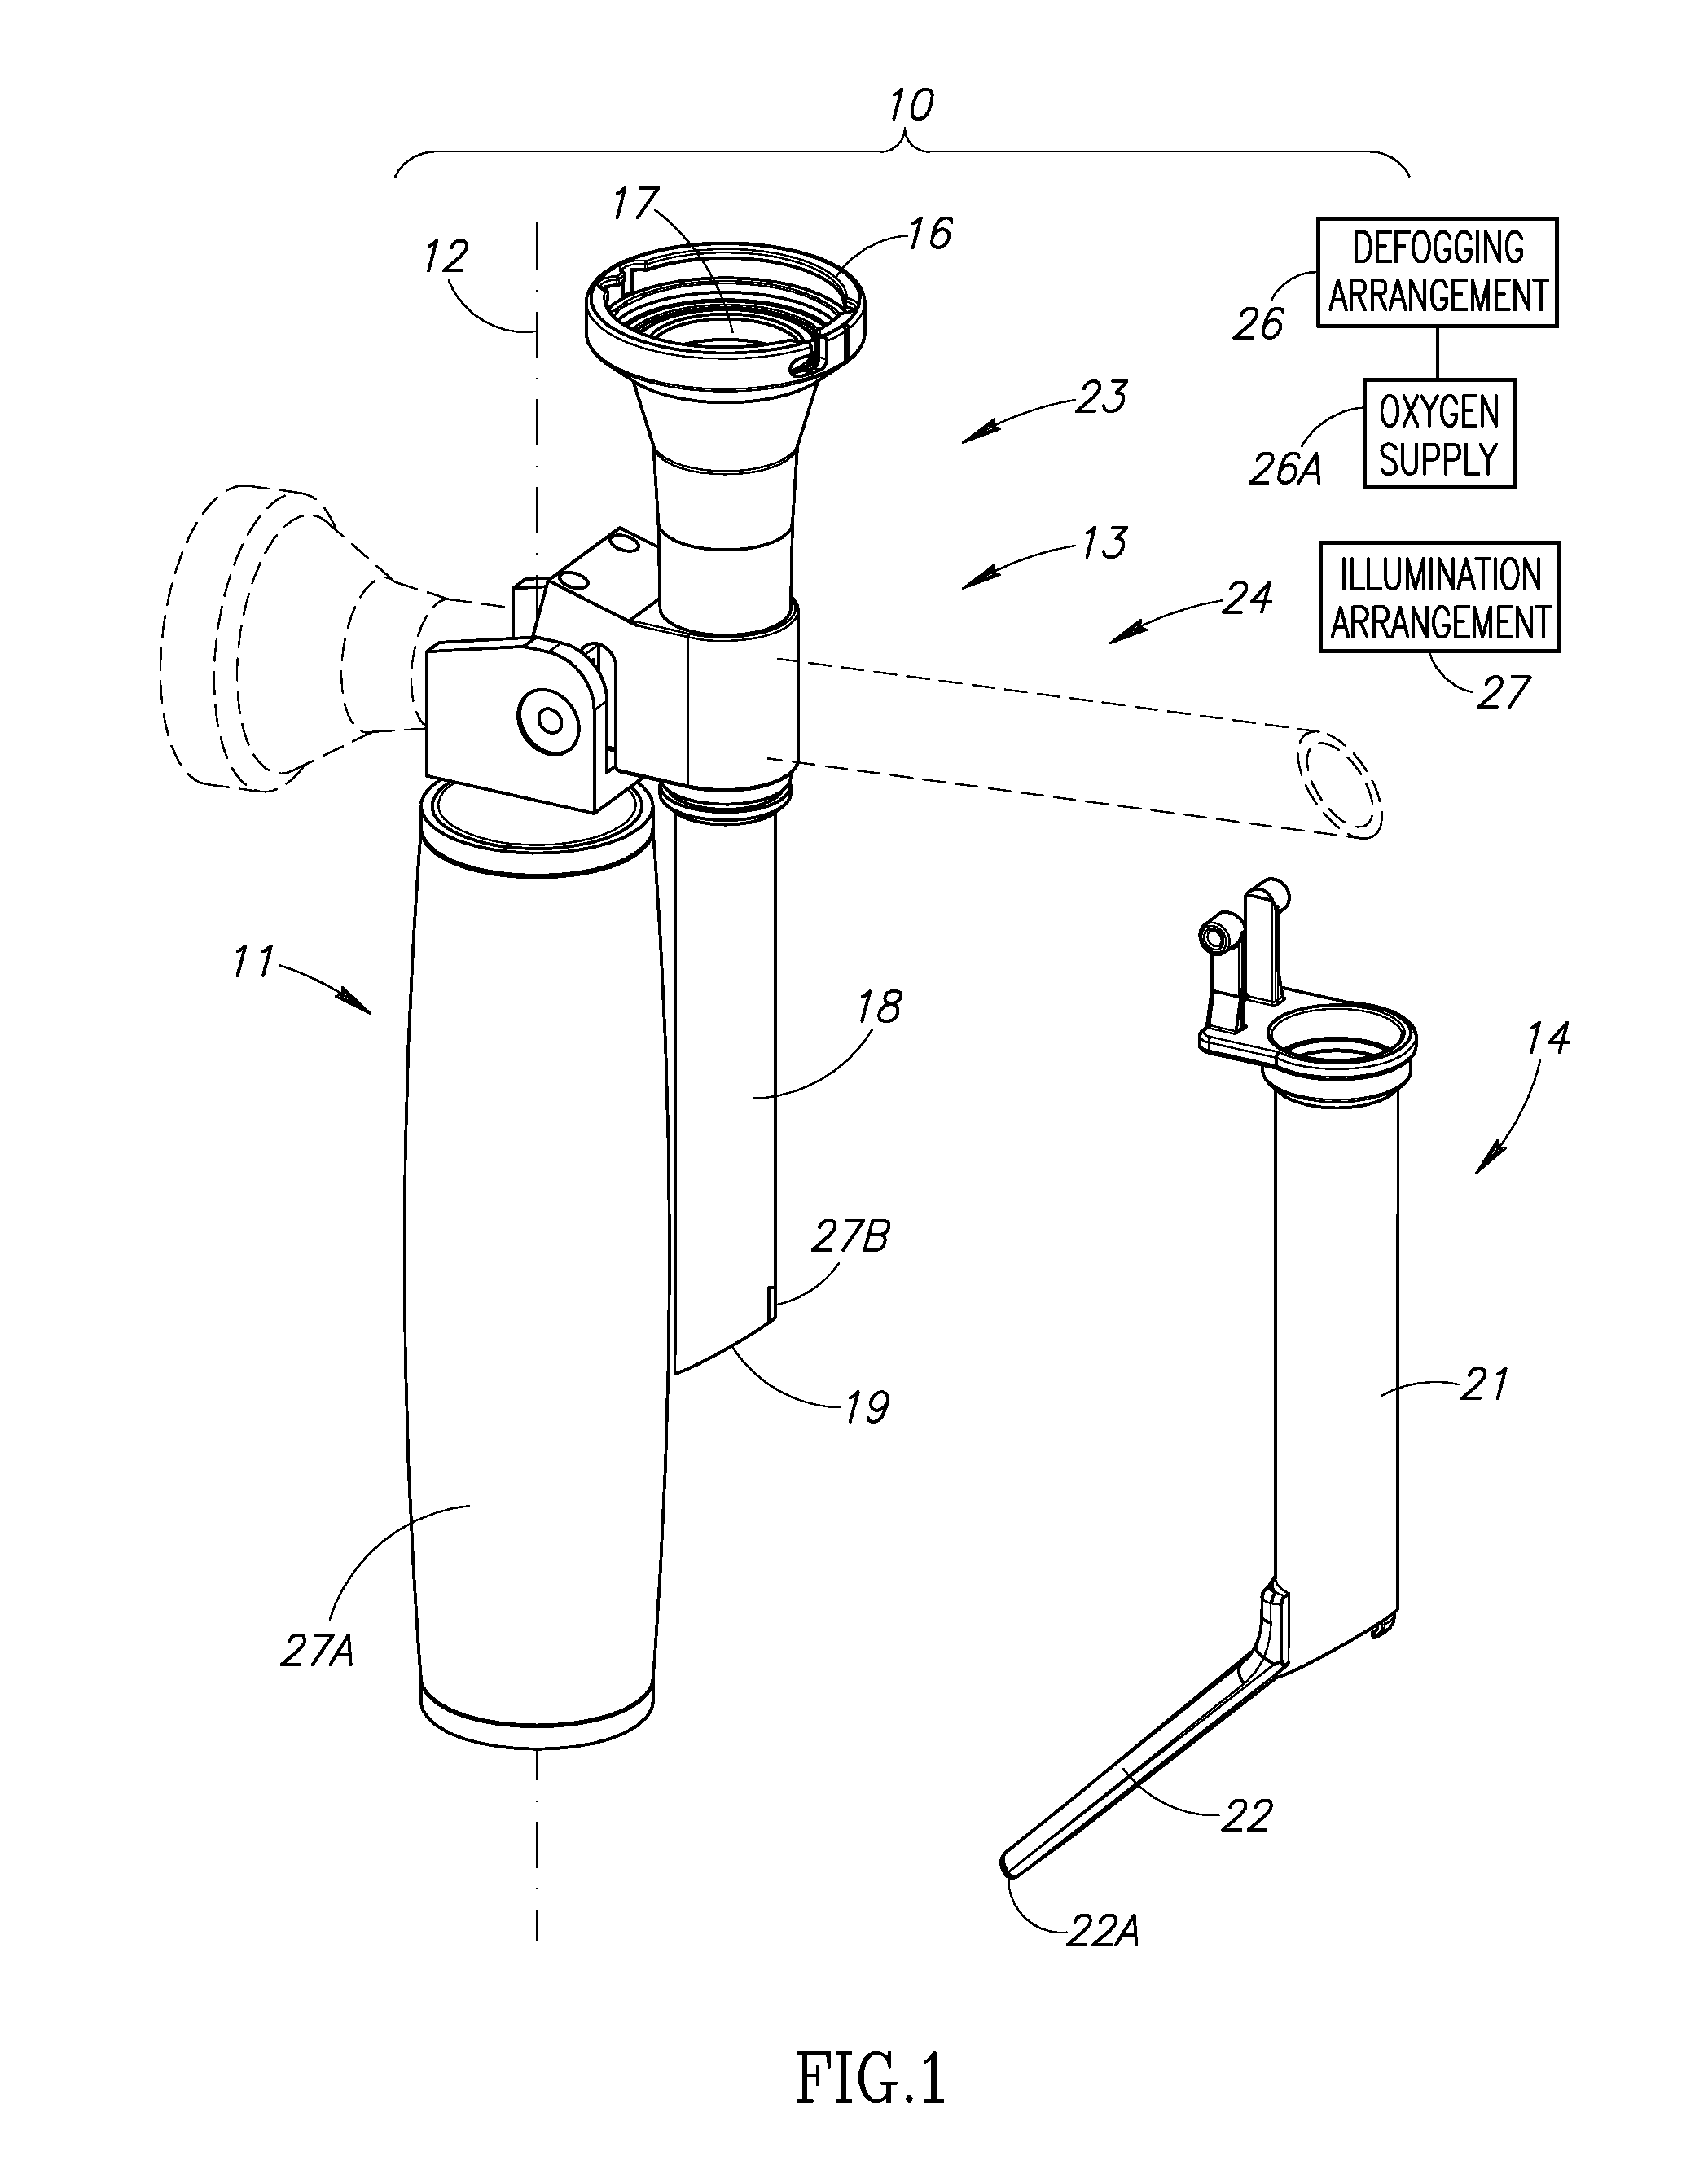 Laryngoscope assembly with enhanced viewing capability